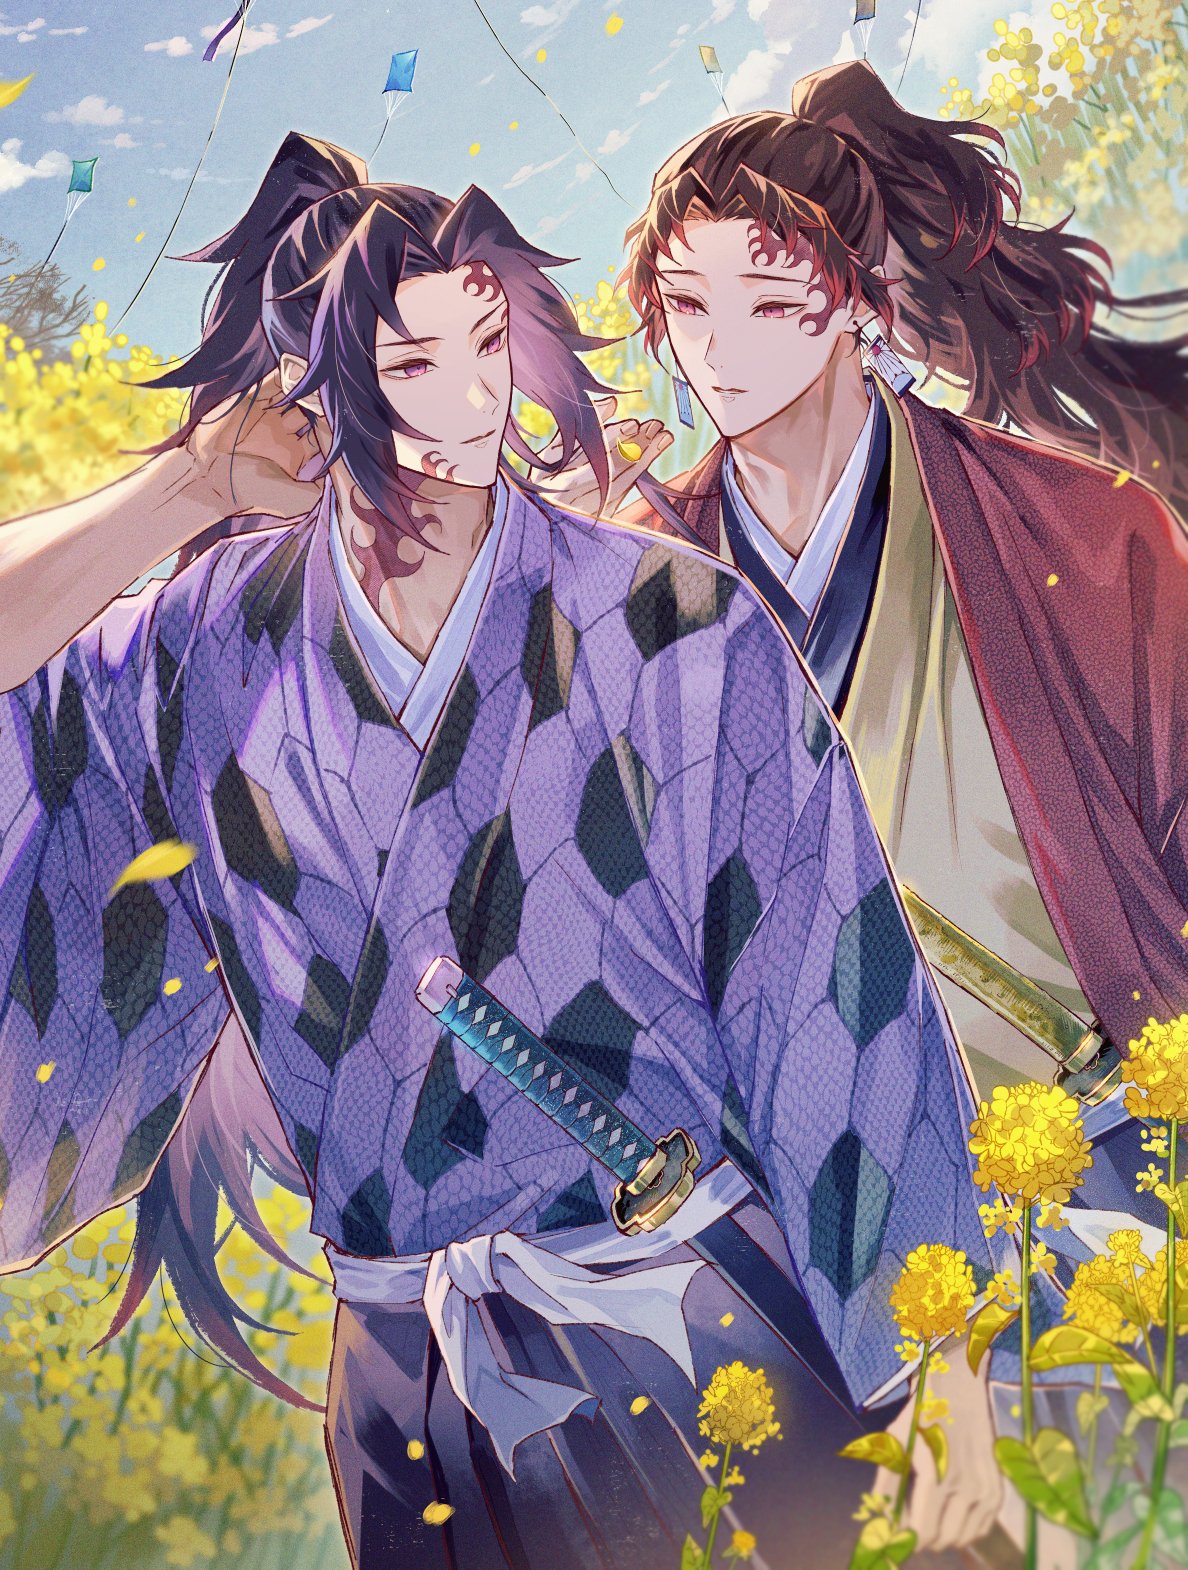 2boys arm_up black_hair black_hakama blue_sky brown_hair brown_kimono closed_mouth clouds commentary_request day earrings facial_tattoo flower hakama hanafuda hanafuda_earrings haori high_ponytail highres honeycomb_(pattern) jacket japanese_clothes jewelry katana kimetsu_no_yaiba kimono kite long_hair long_sleeves looking_at_another looking_to_the_side male_focus multicolored_hair multiple_boys neck_tattoo open_clothes open_jacket outdoors oyumai parted_bangs parted_lips plant ponytail purple_kimono red_eyes red_jacket redhead ribbon sheath sheathed sidelocks sky standing sword tattoo tree tsugikuni_michikatsu tsugikuni_yoriichi violet_eyes weapon white_ribbon wide_sleeves yellow_flower